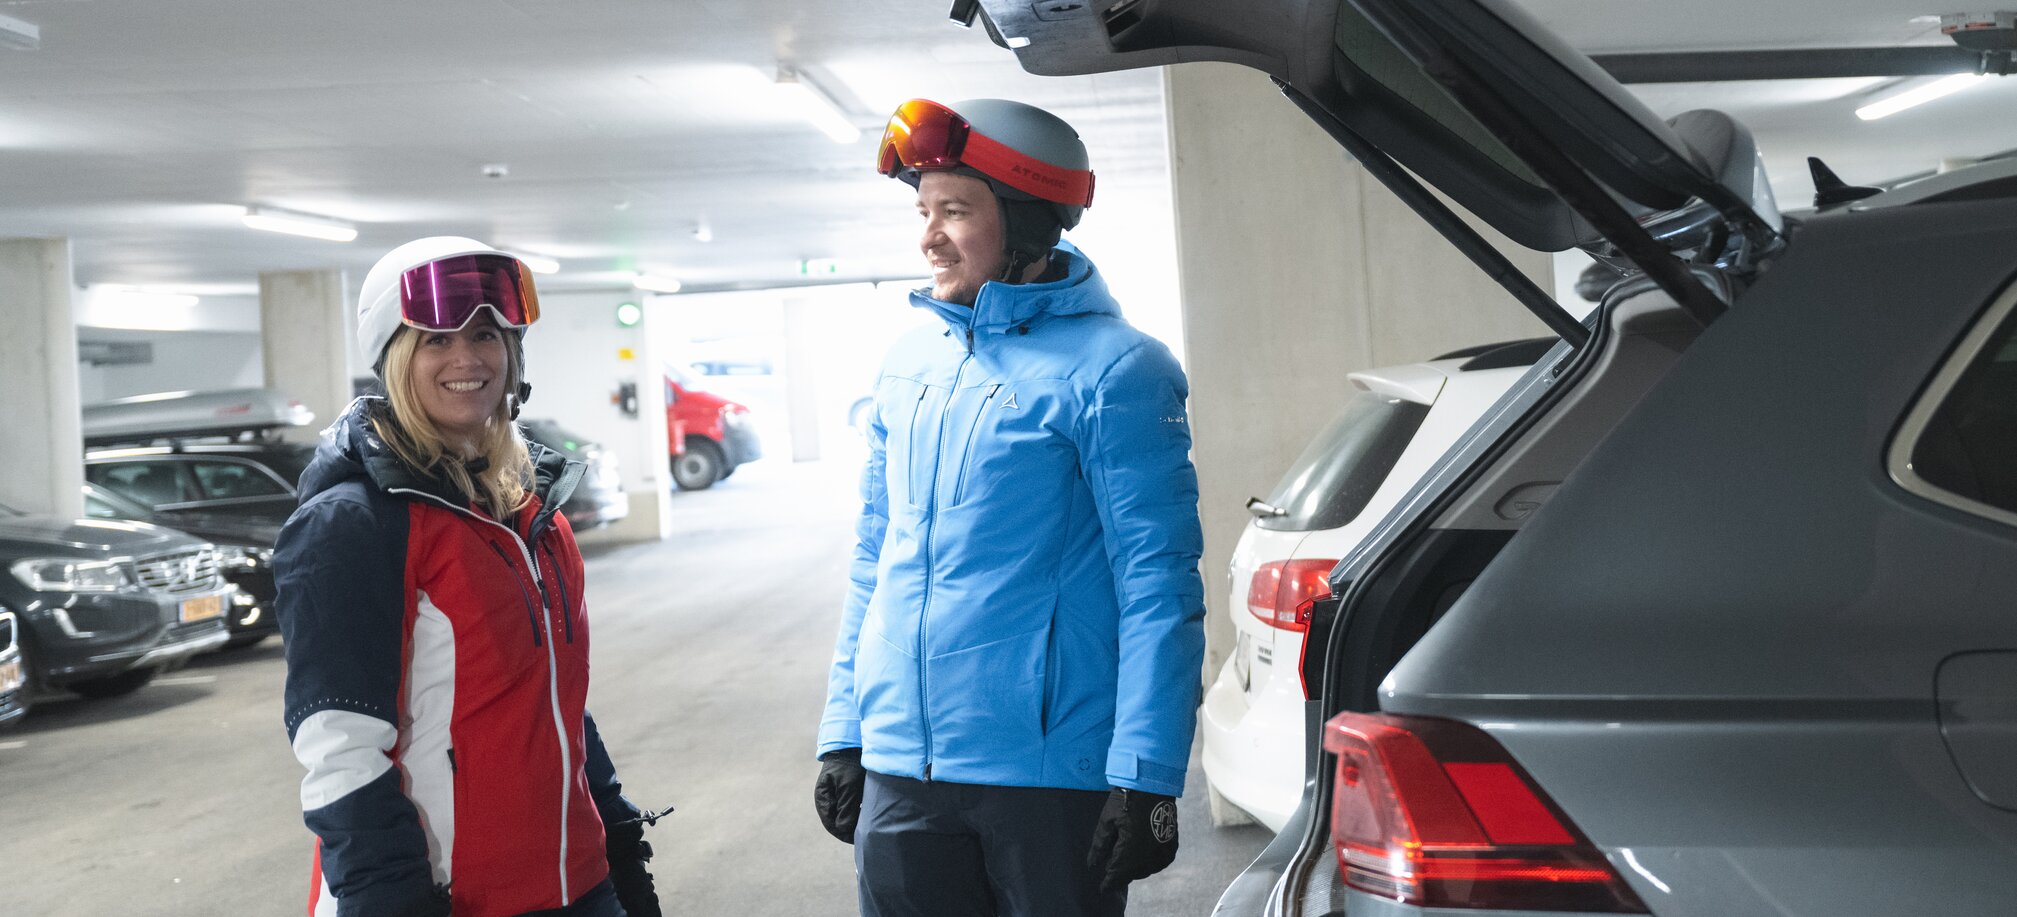 Two people in ski suits and ski helmets stand next to an open boot of a grey car | © Ski amadé